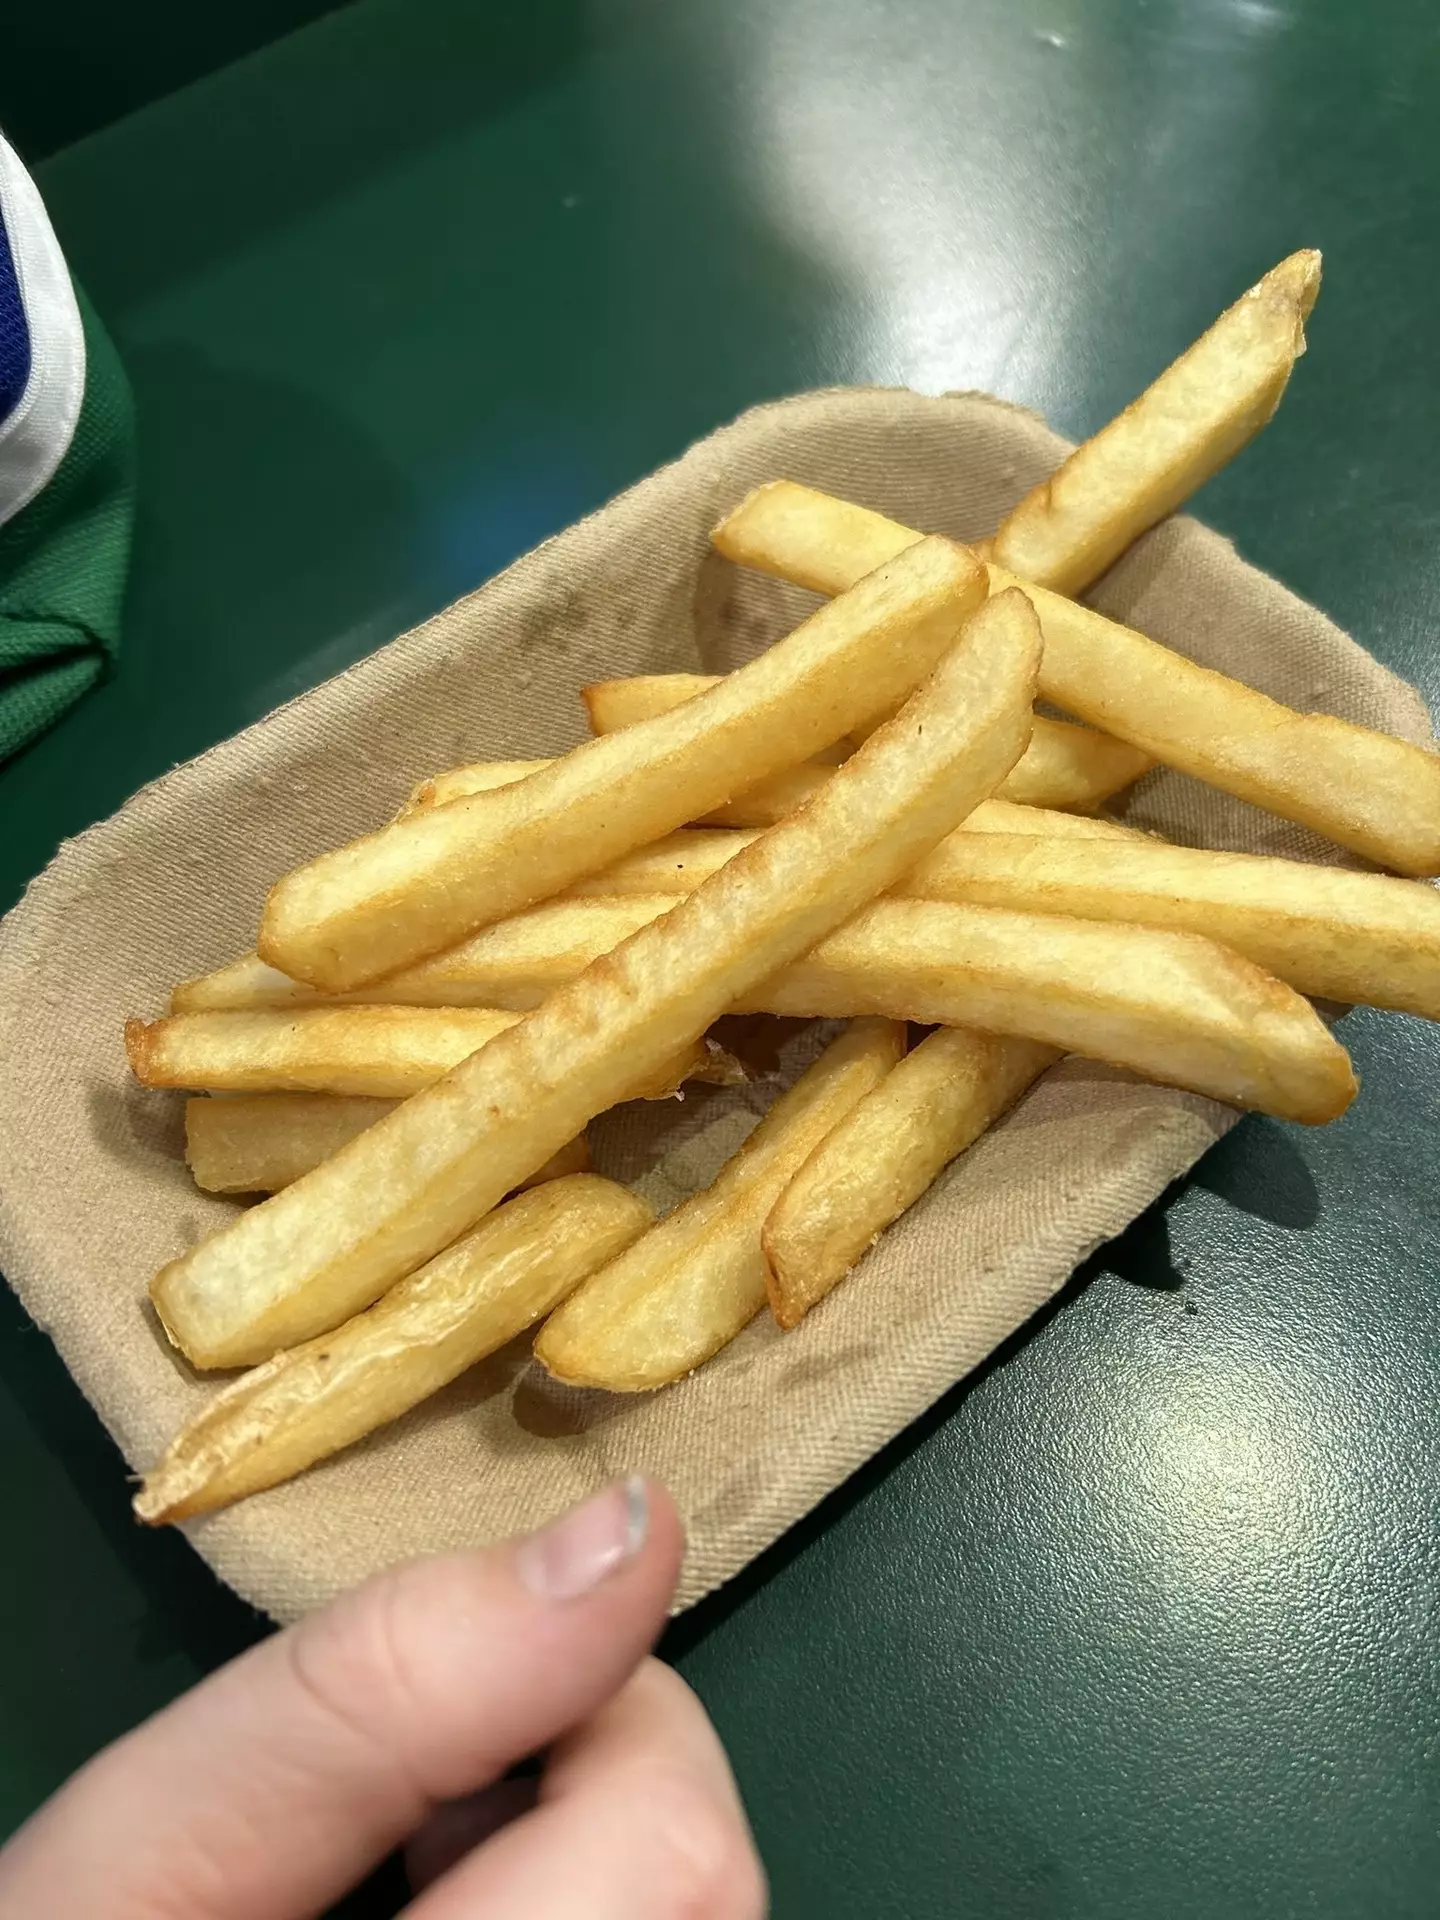 The fries in question.